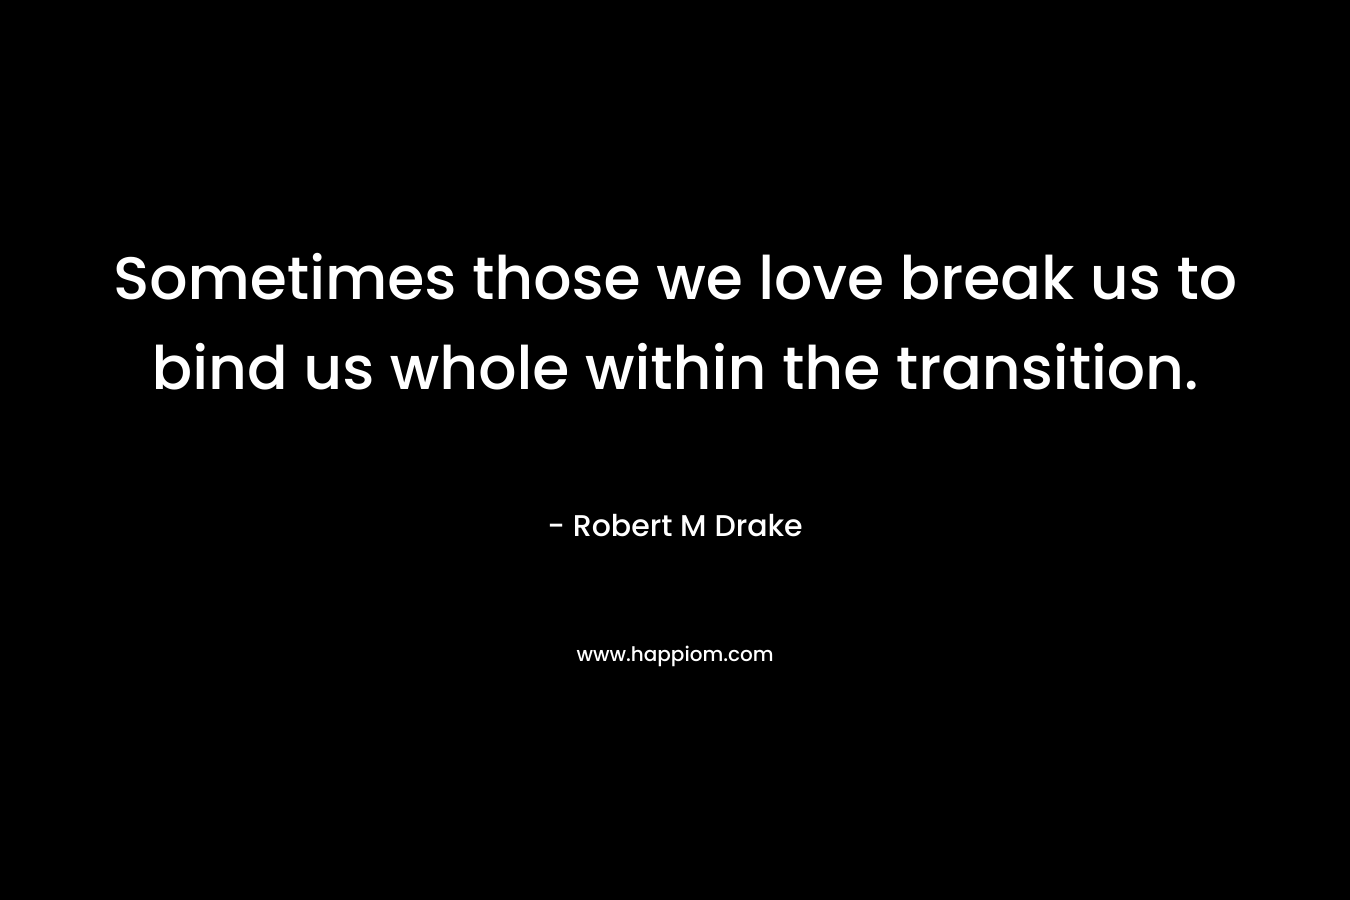 Sometimes those we love break us to bind us whole within the transition. – Robert M Drake